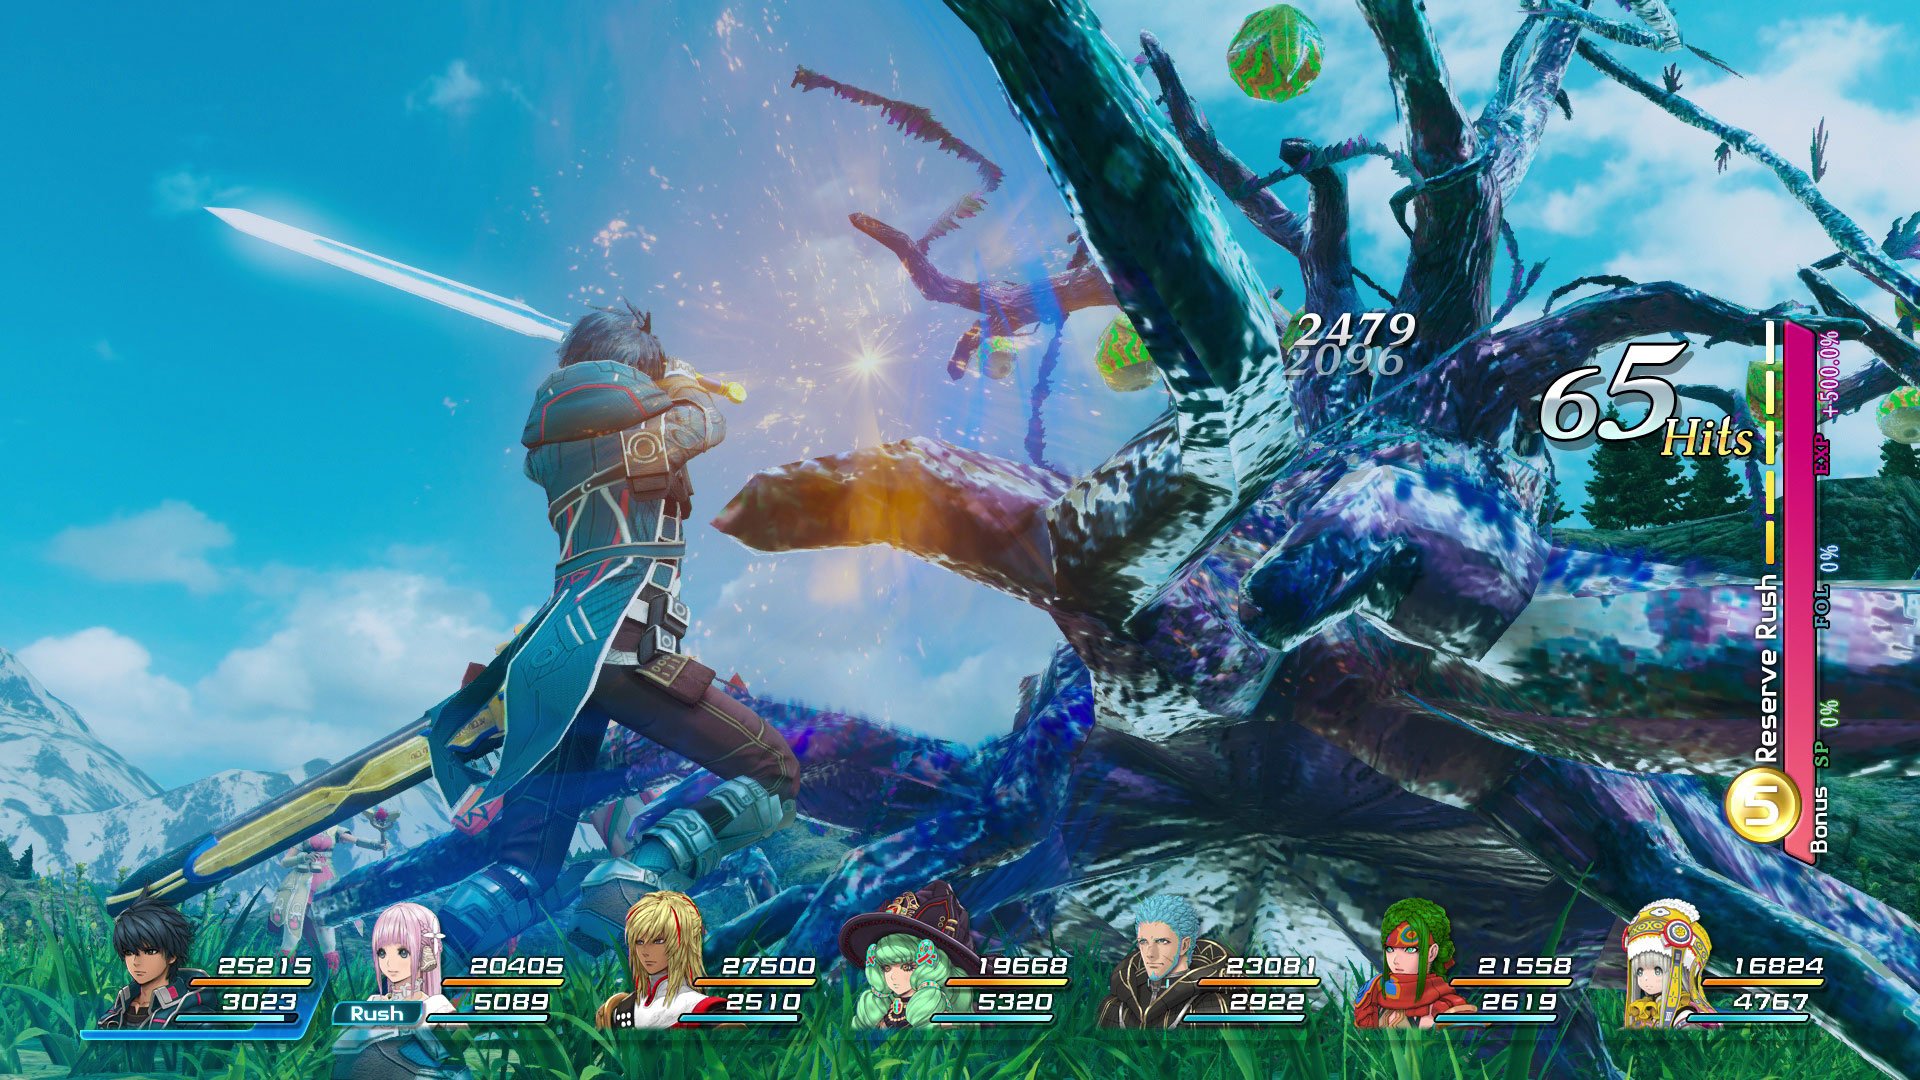 star-ocean-integrity-and-faithlessness-review-ps4-push-square